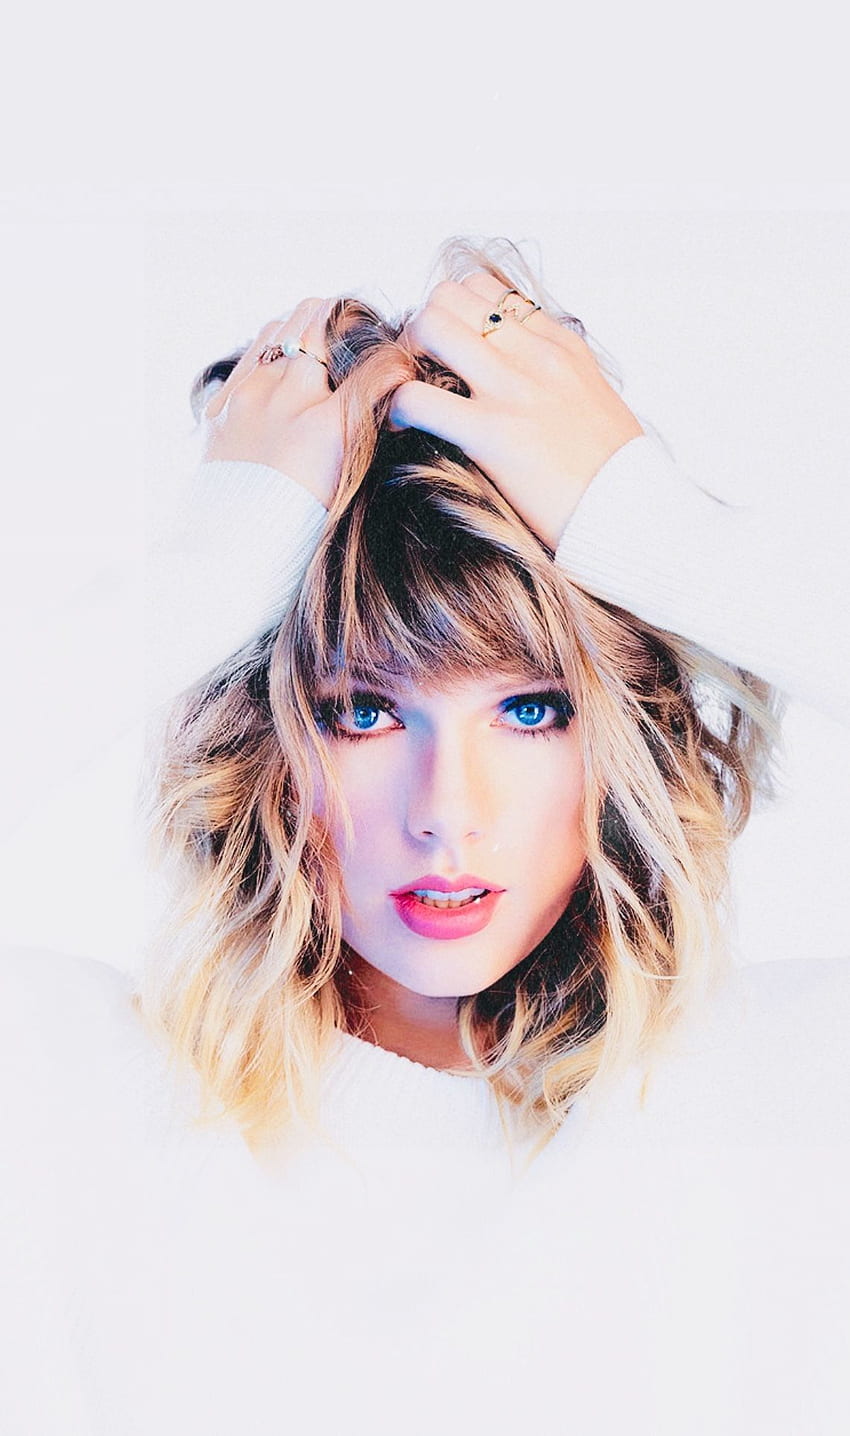 Midnights Taylor Swift Wallpapers  Wallpaper Cave